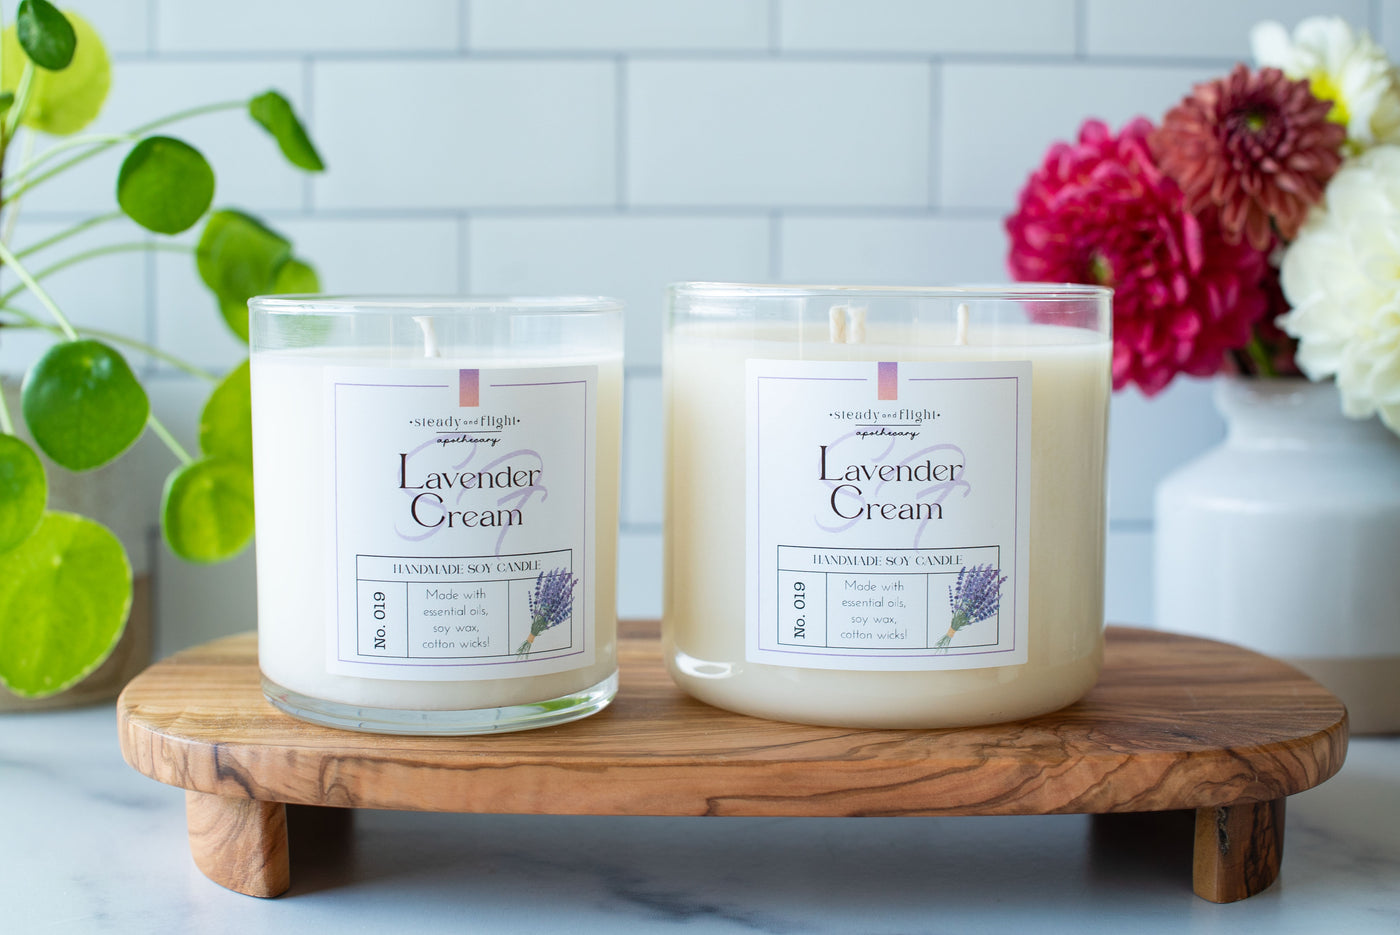 relaxing candle scents